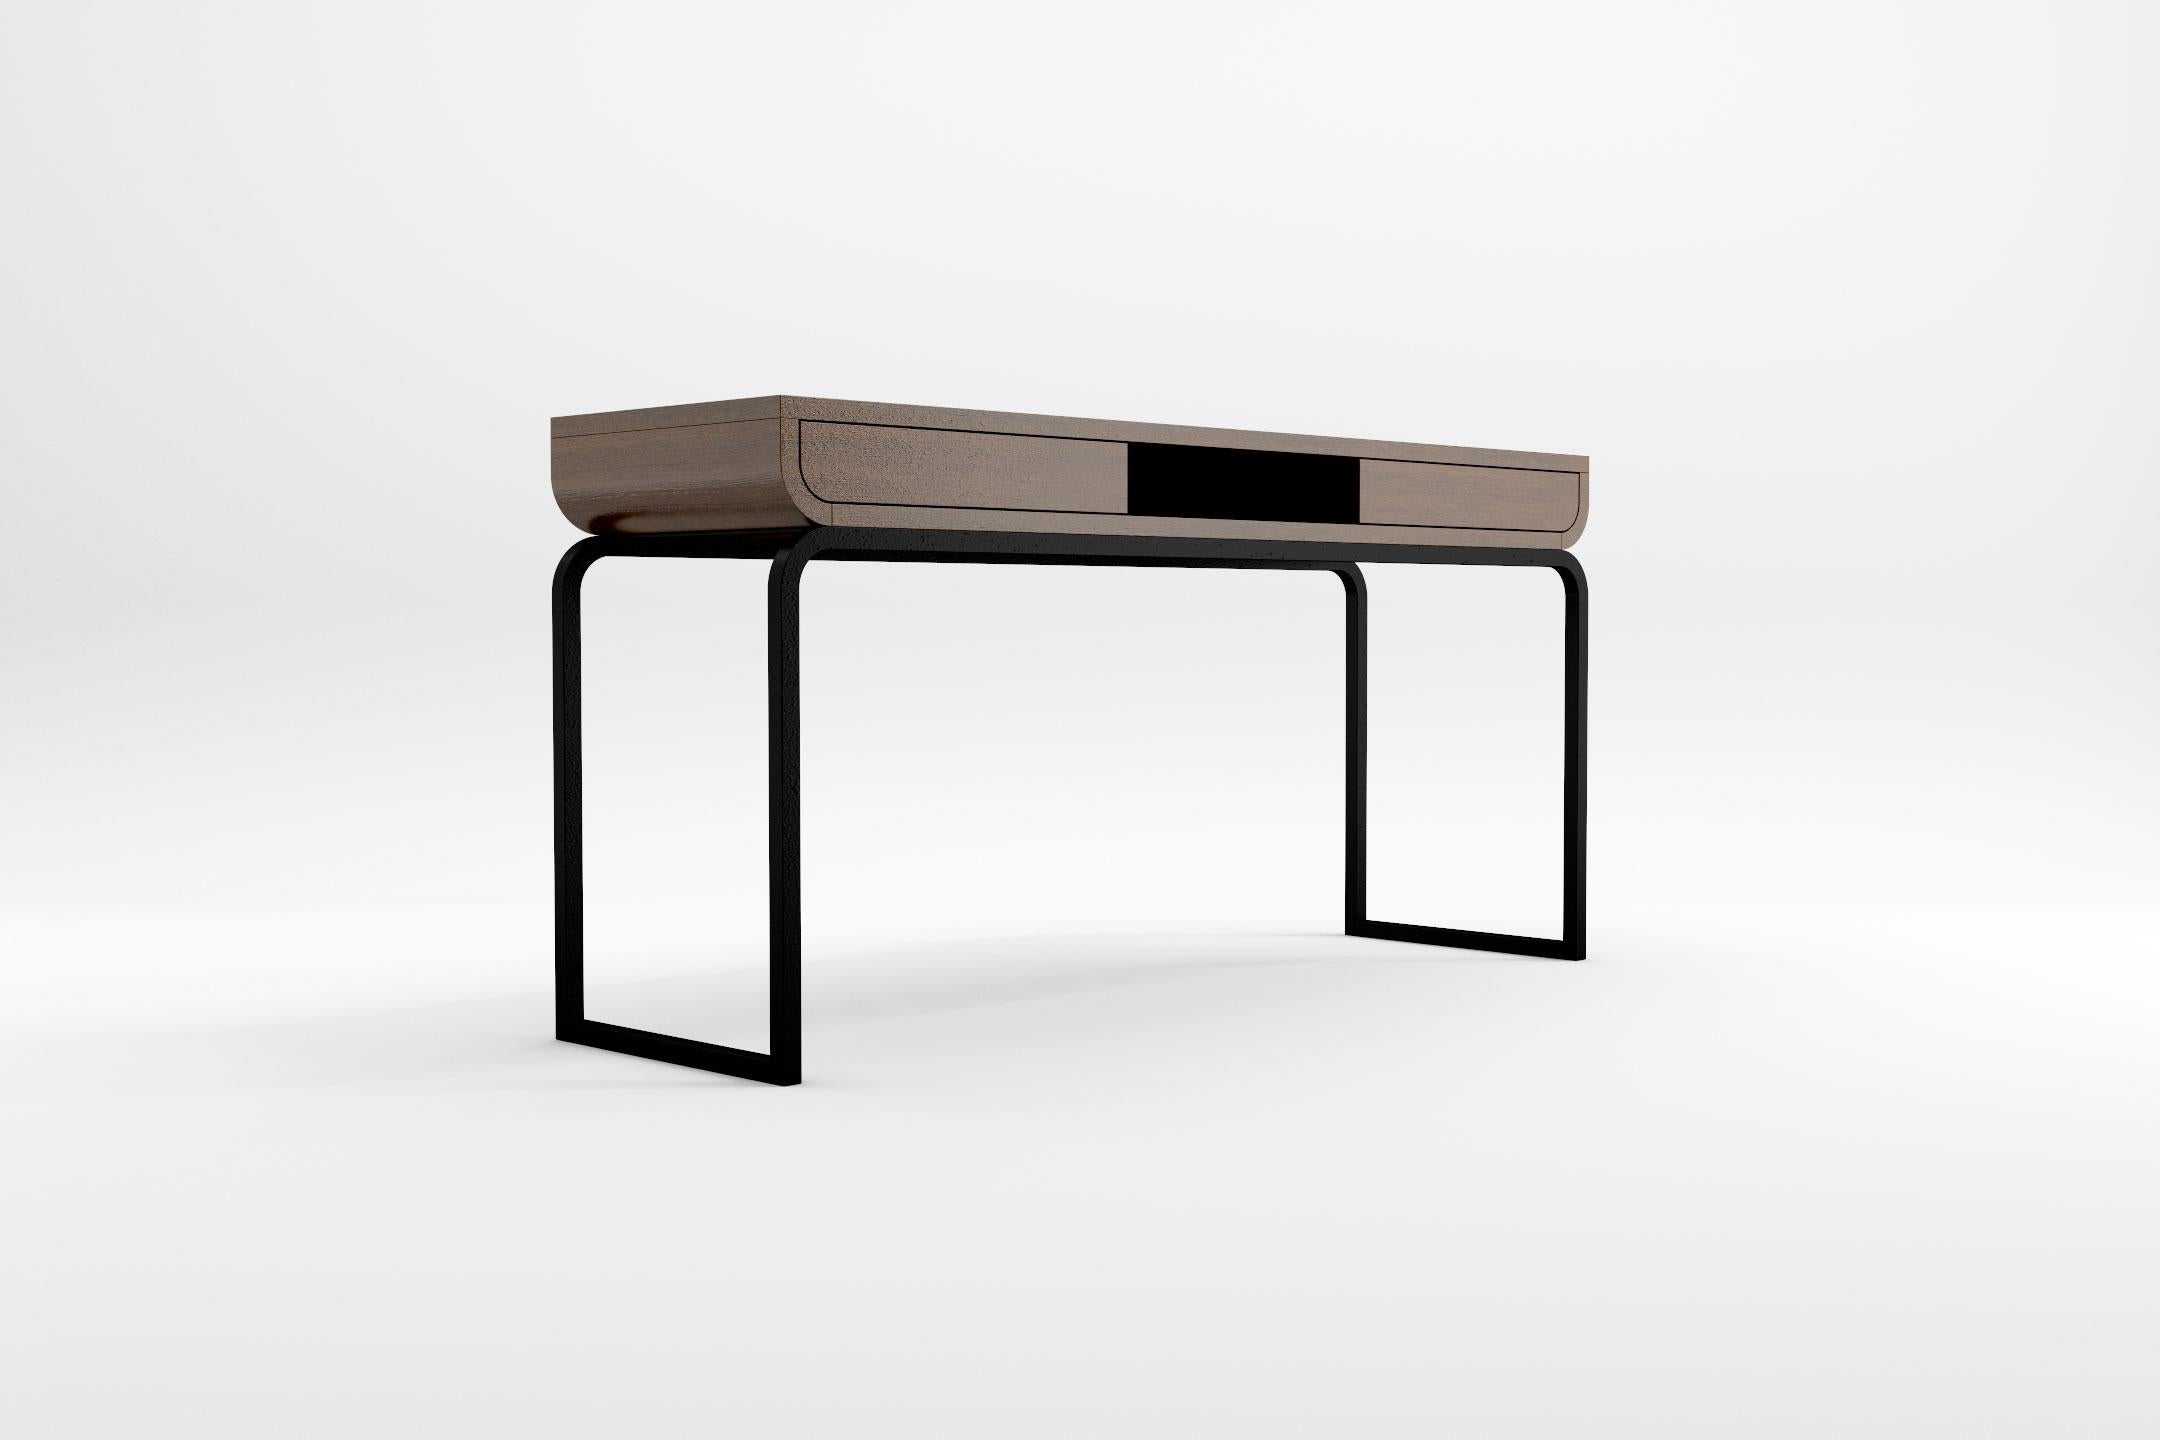 Intertwining wood and wrought iron, the sculptural lines of the Raw collection combine exquisite natural materials with modern Scandinavian shapes to create a breathtaking and unique design. The console comprises a set of two drawers with push-open